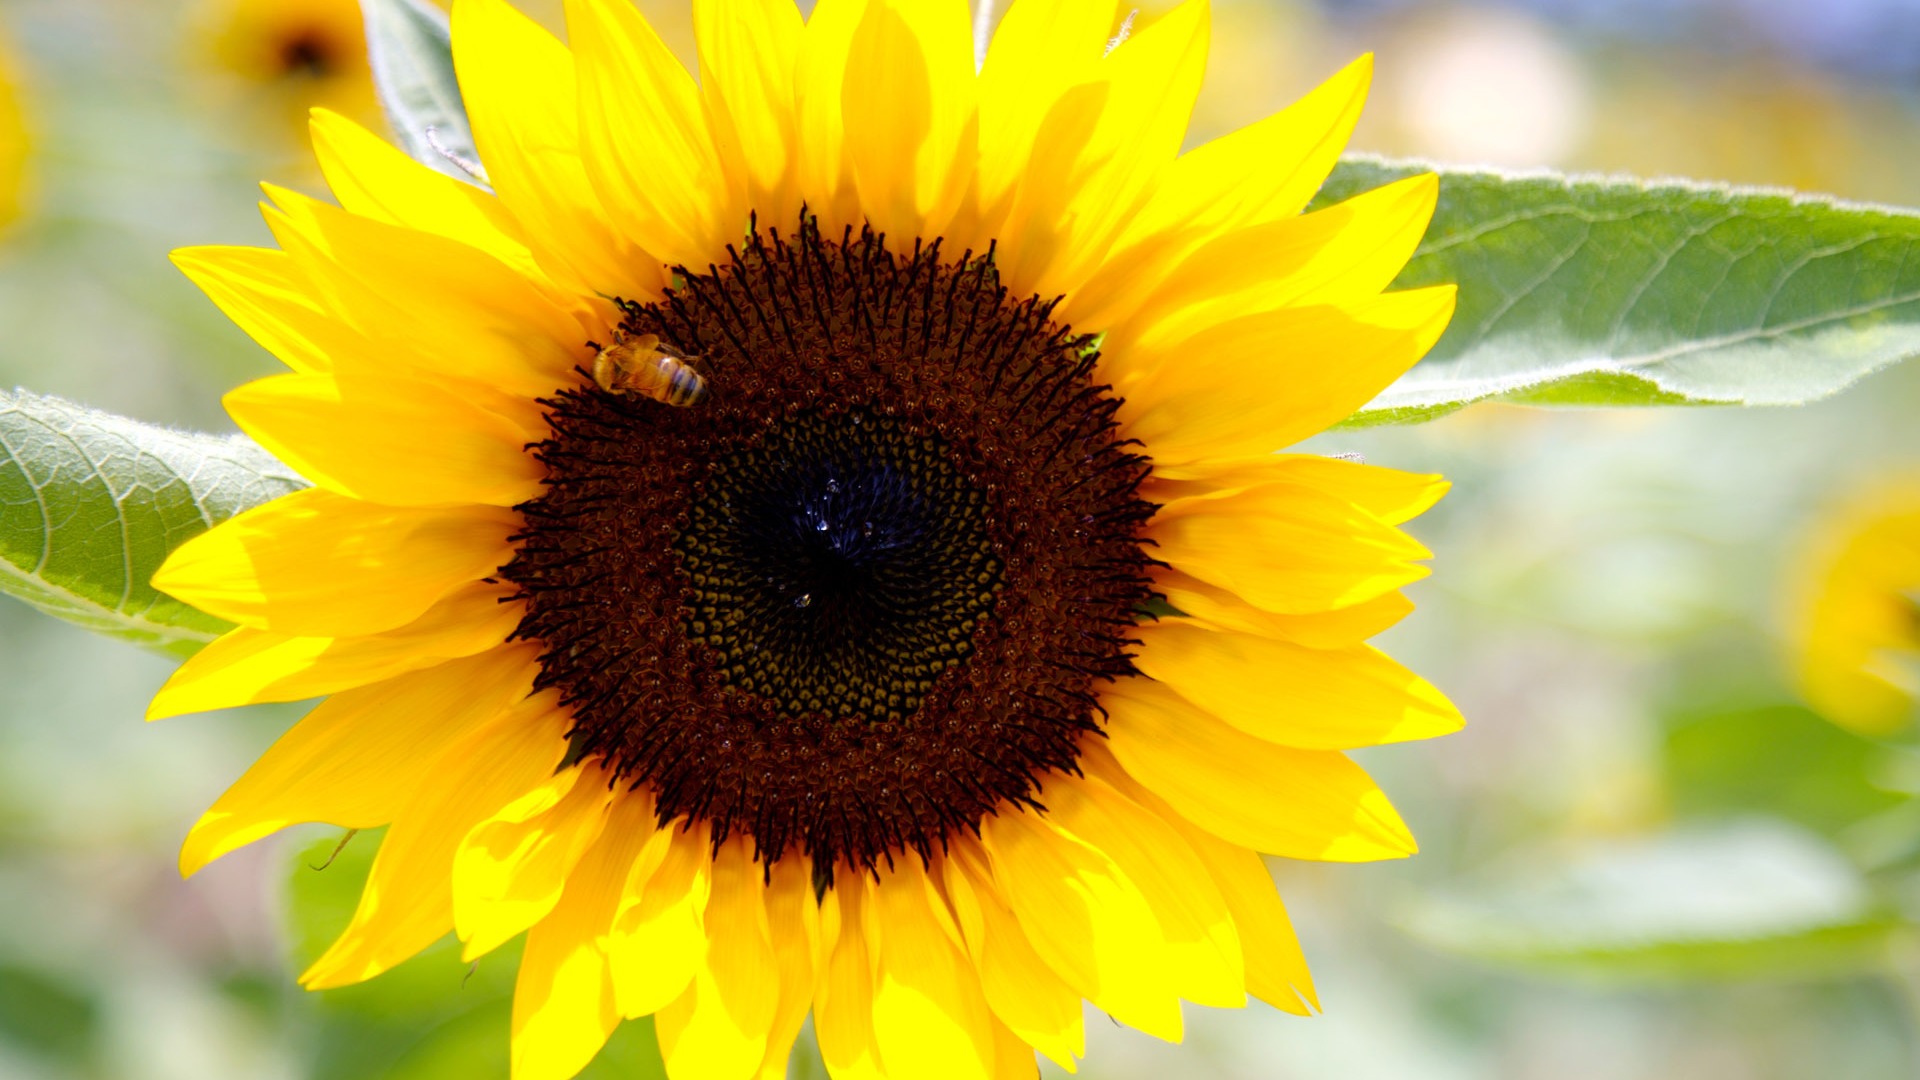 Sunny sunflower photo HD Wallpapers #22 - 1920x1080